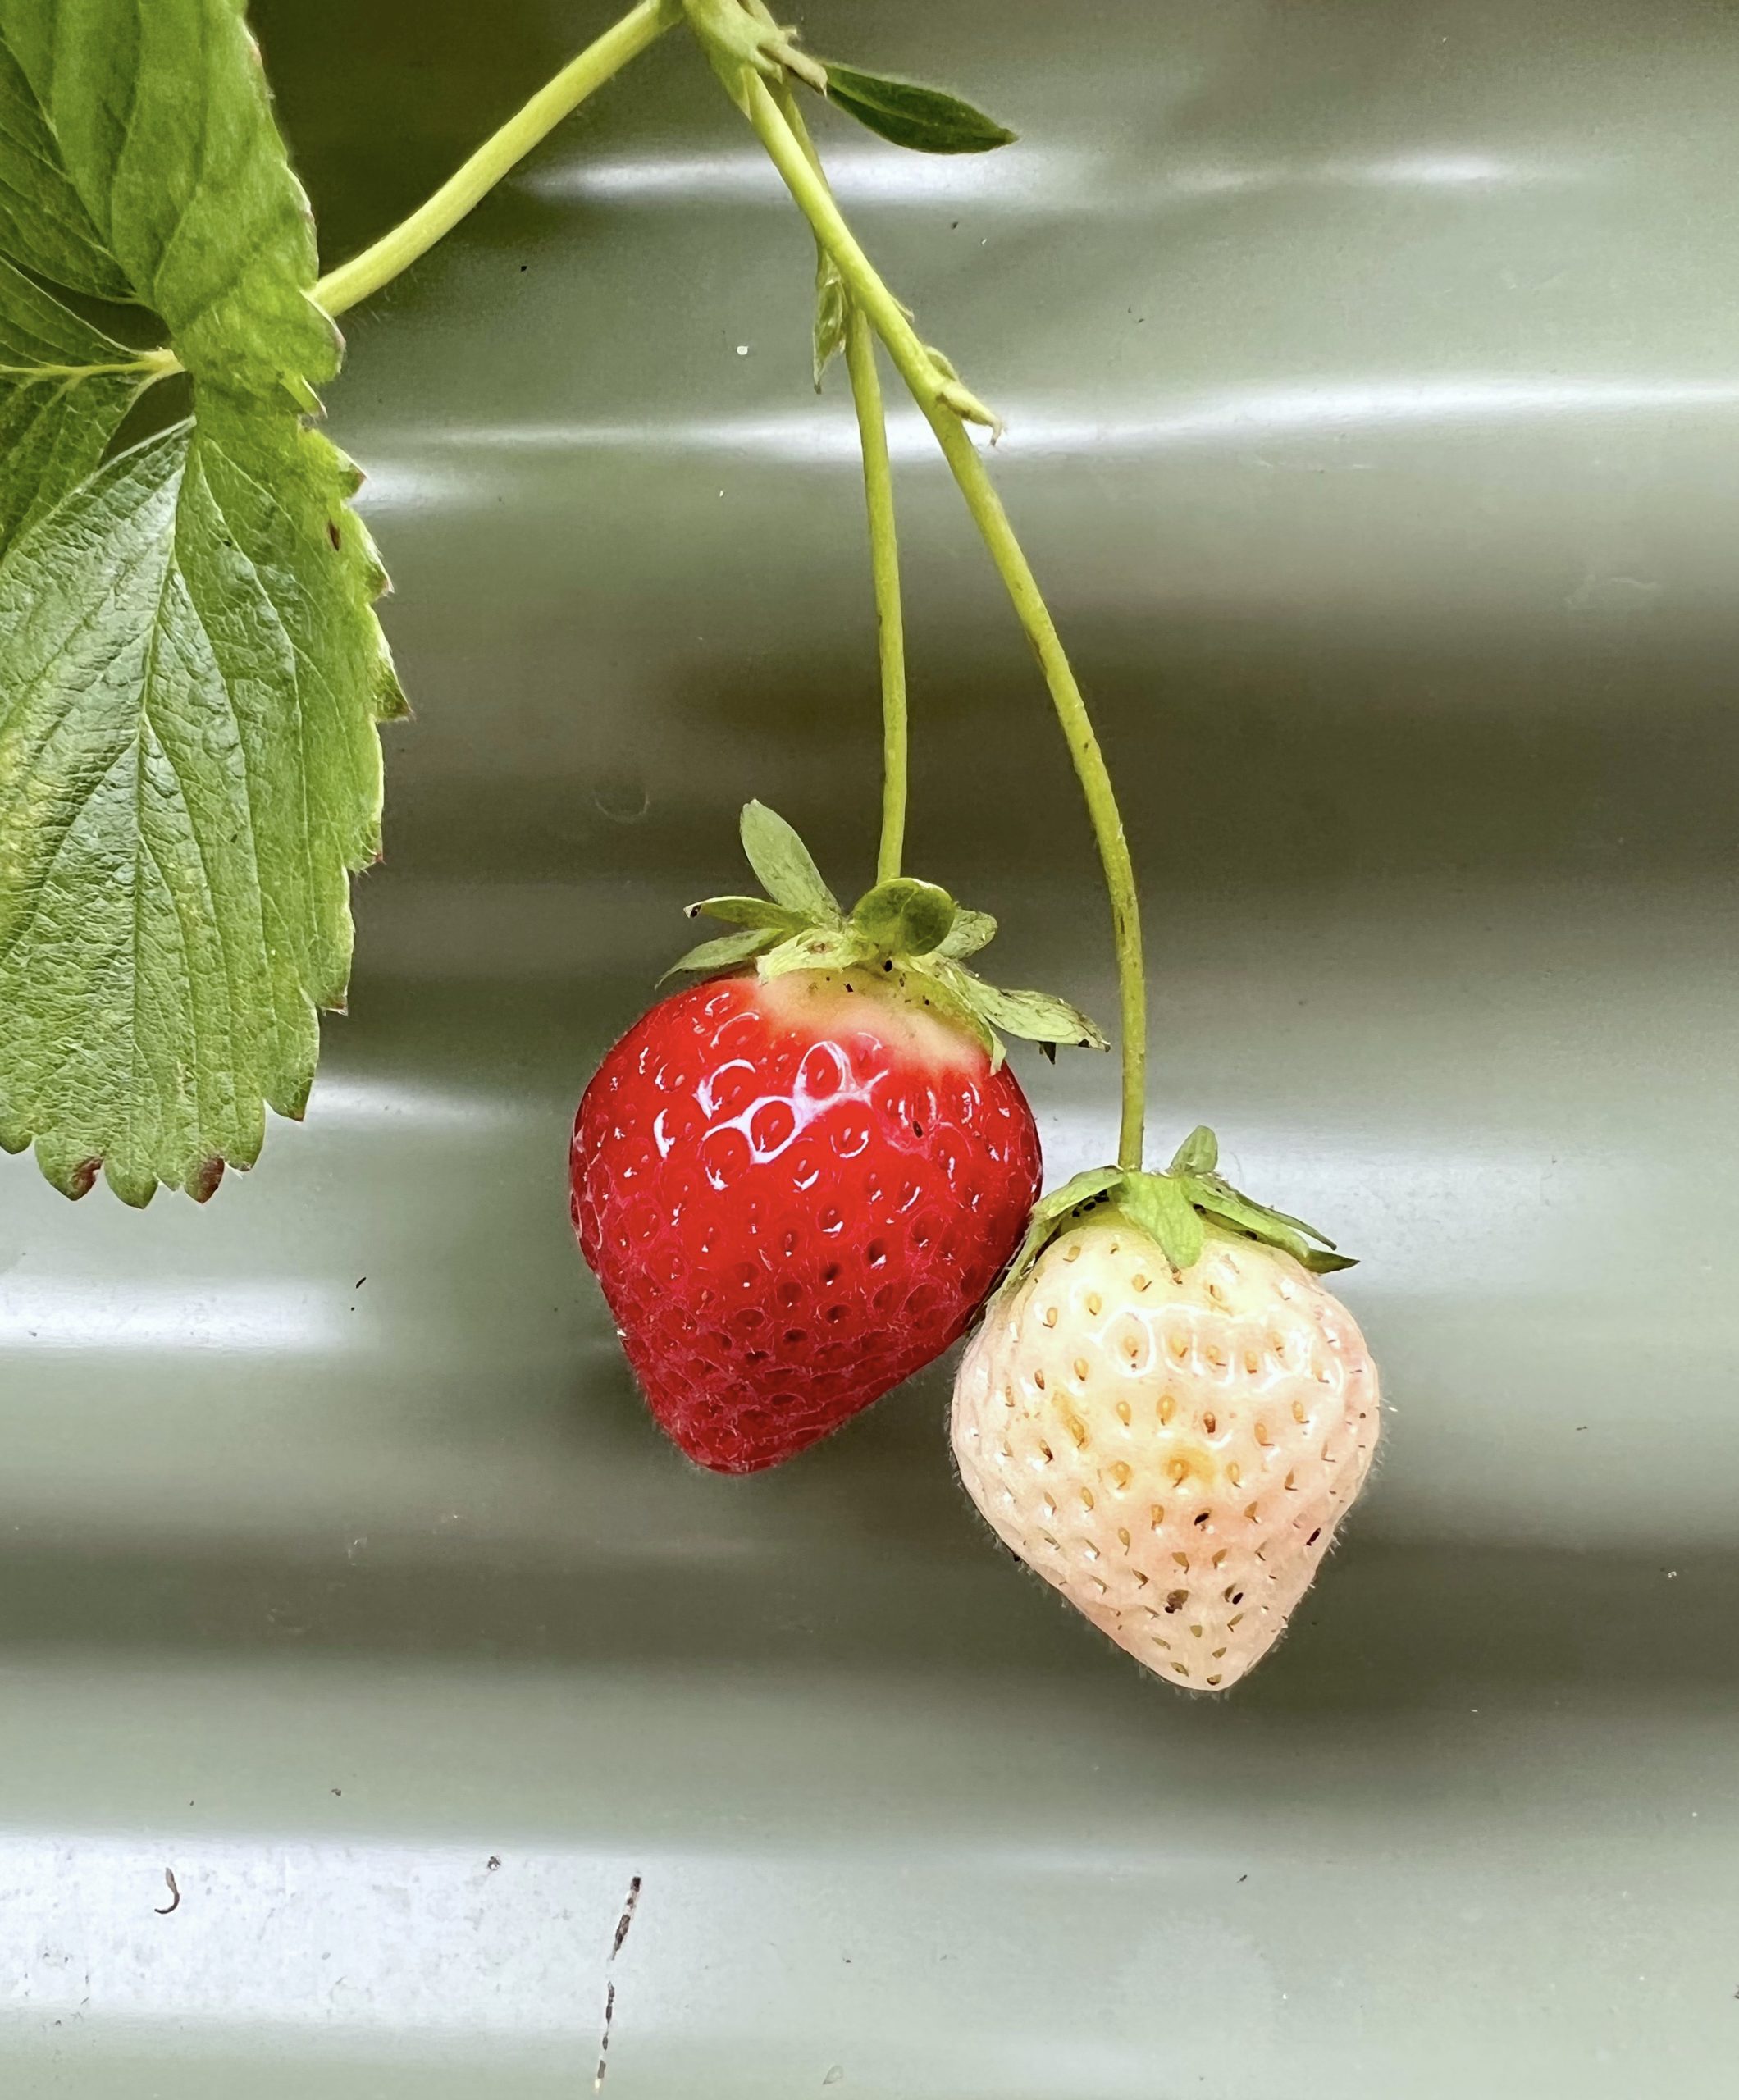 Two strawberries hanging from a plant, one is red and ripe, the other is white and unripe